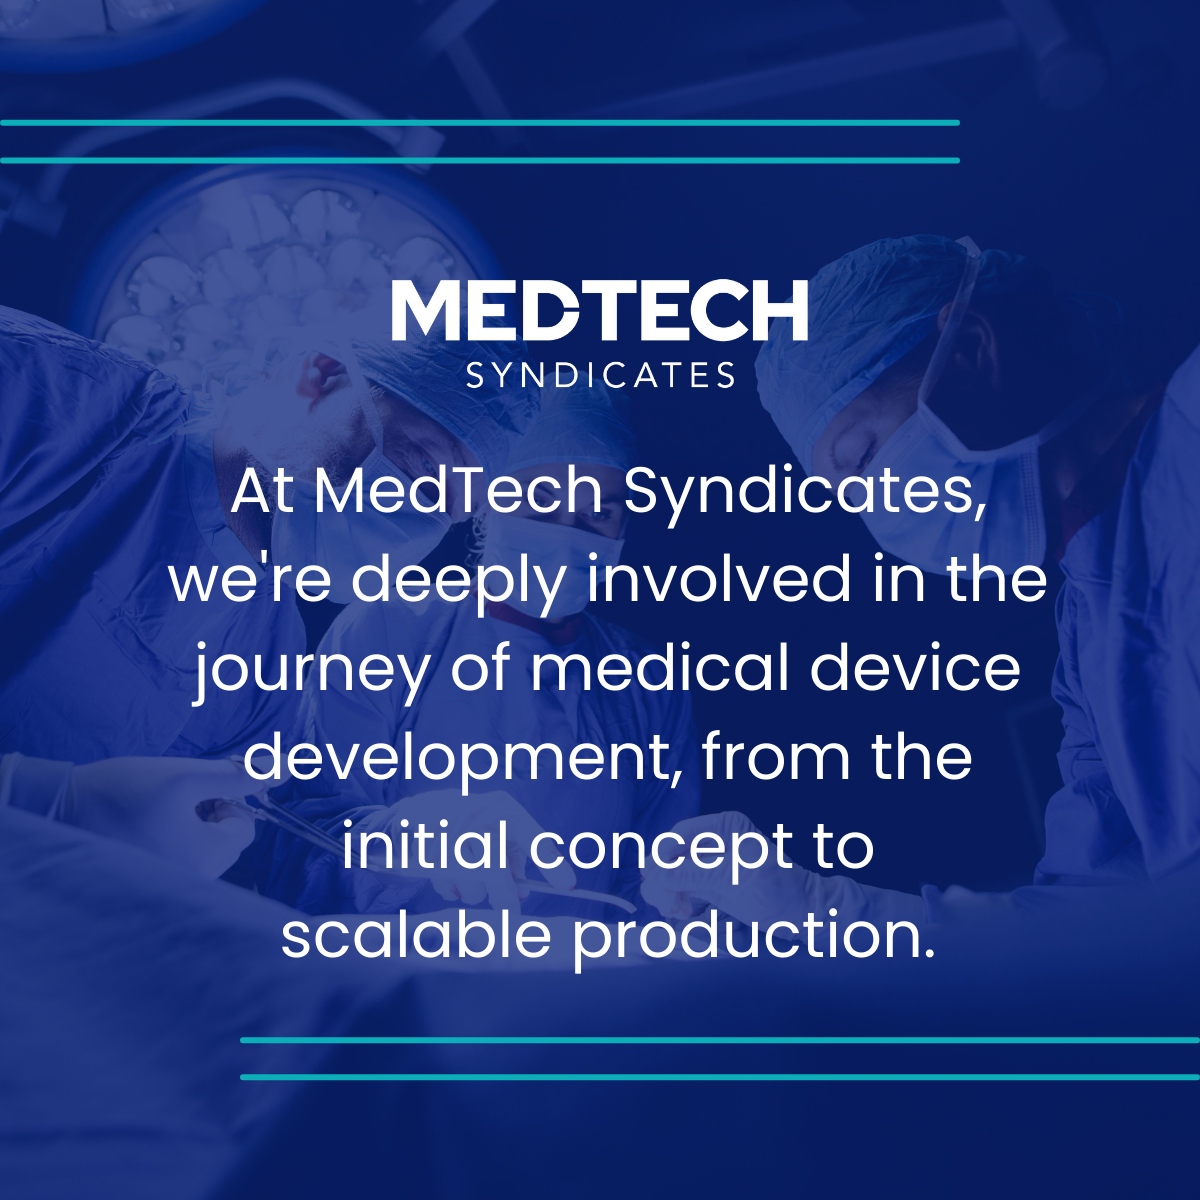 At MedTech Syndicates, we're deeply involved in the journey of medical device development, from the initial concept to scalable production. #MedTechSyndicates #InnovationInHealthcare #TechnologyTransfer